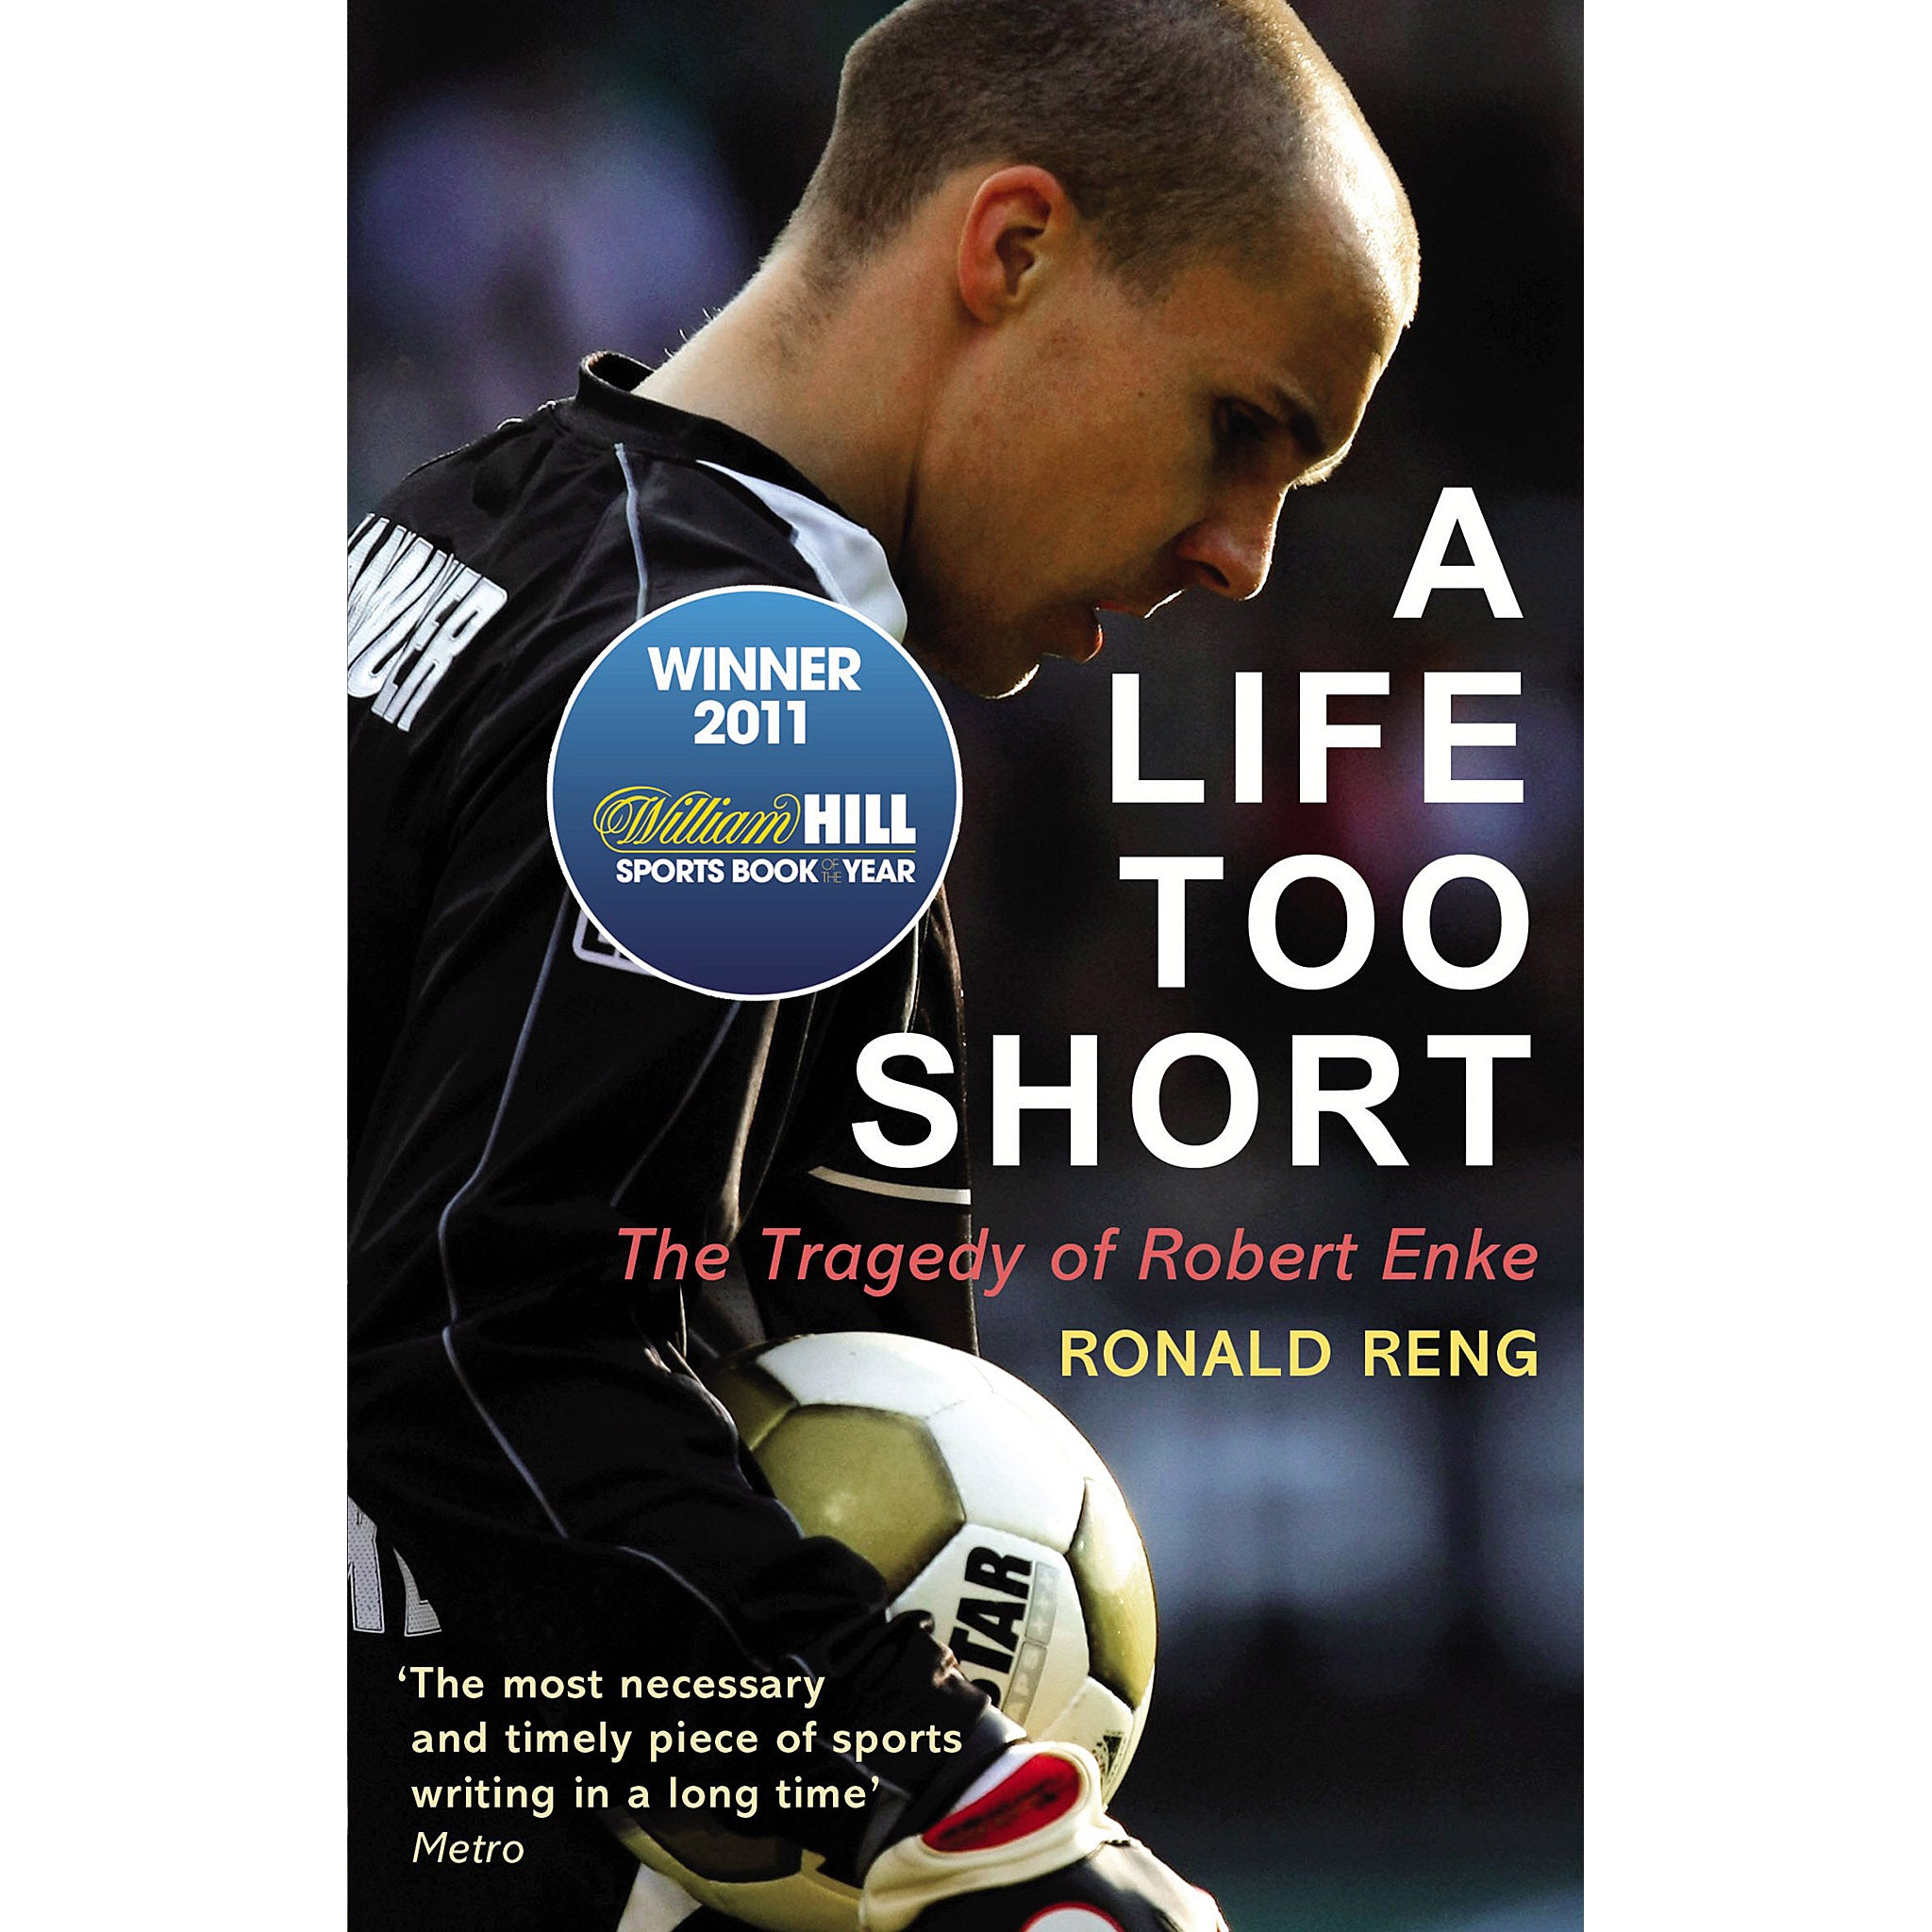 A Life too Short – The Tragedy of Robert Enke